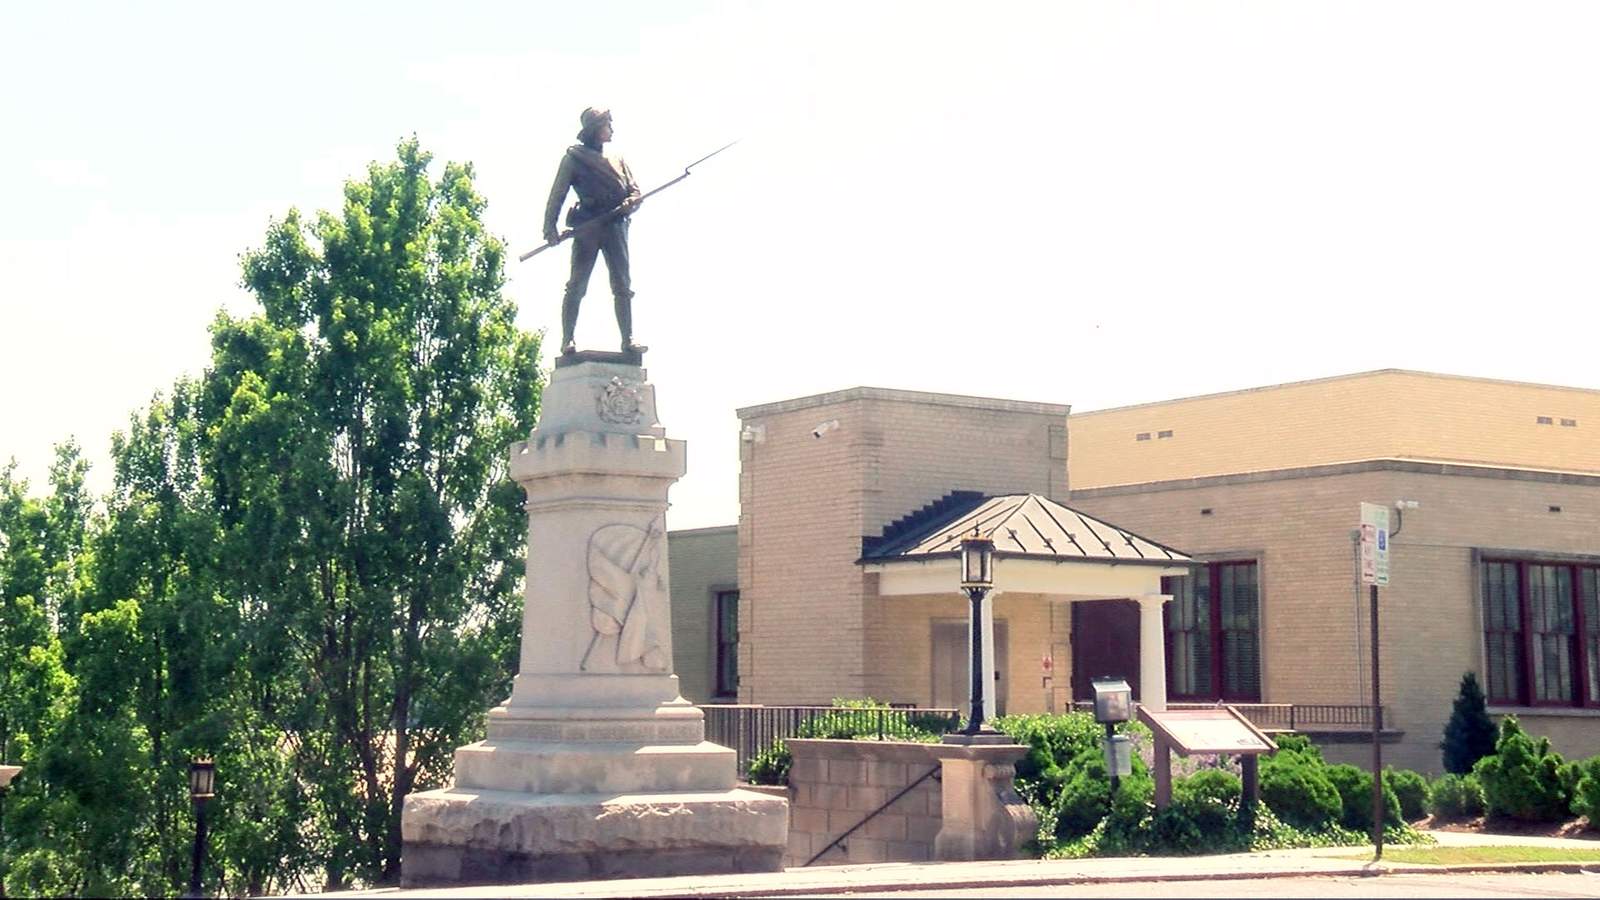 Lynchburg mayor announces shes indifferent to future of citys Confederate statues